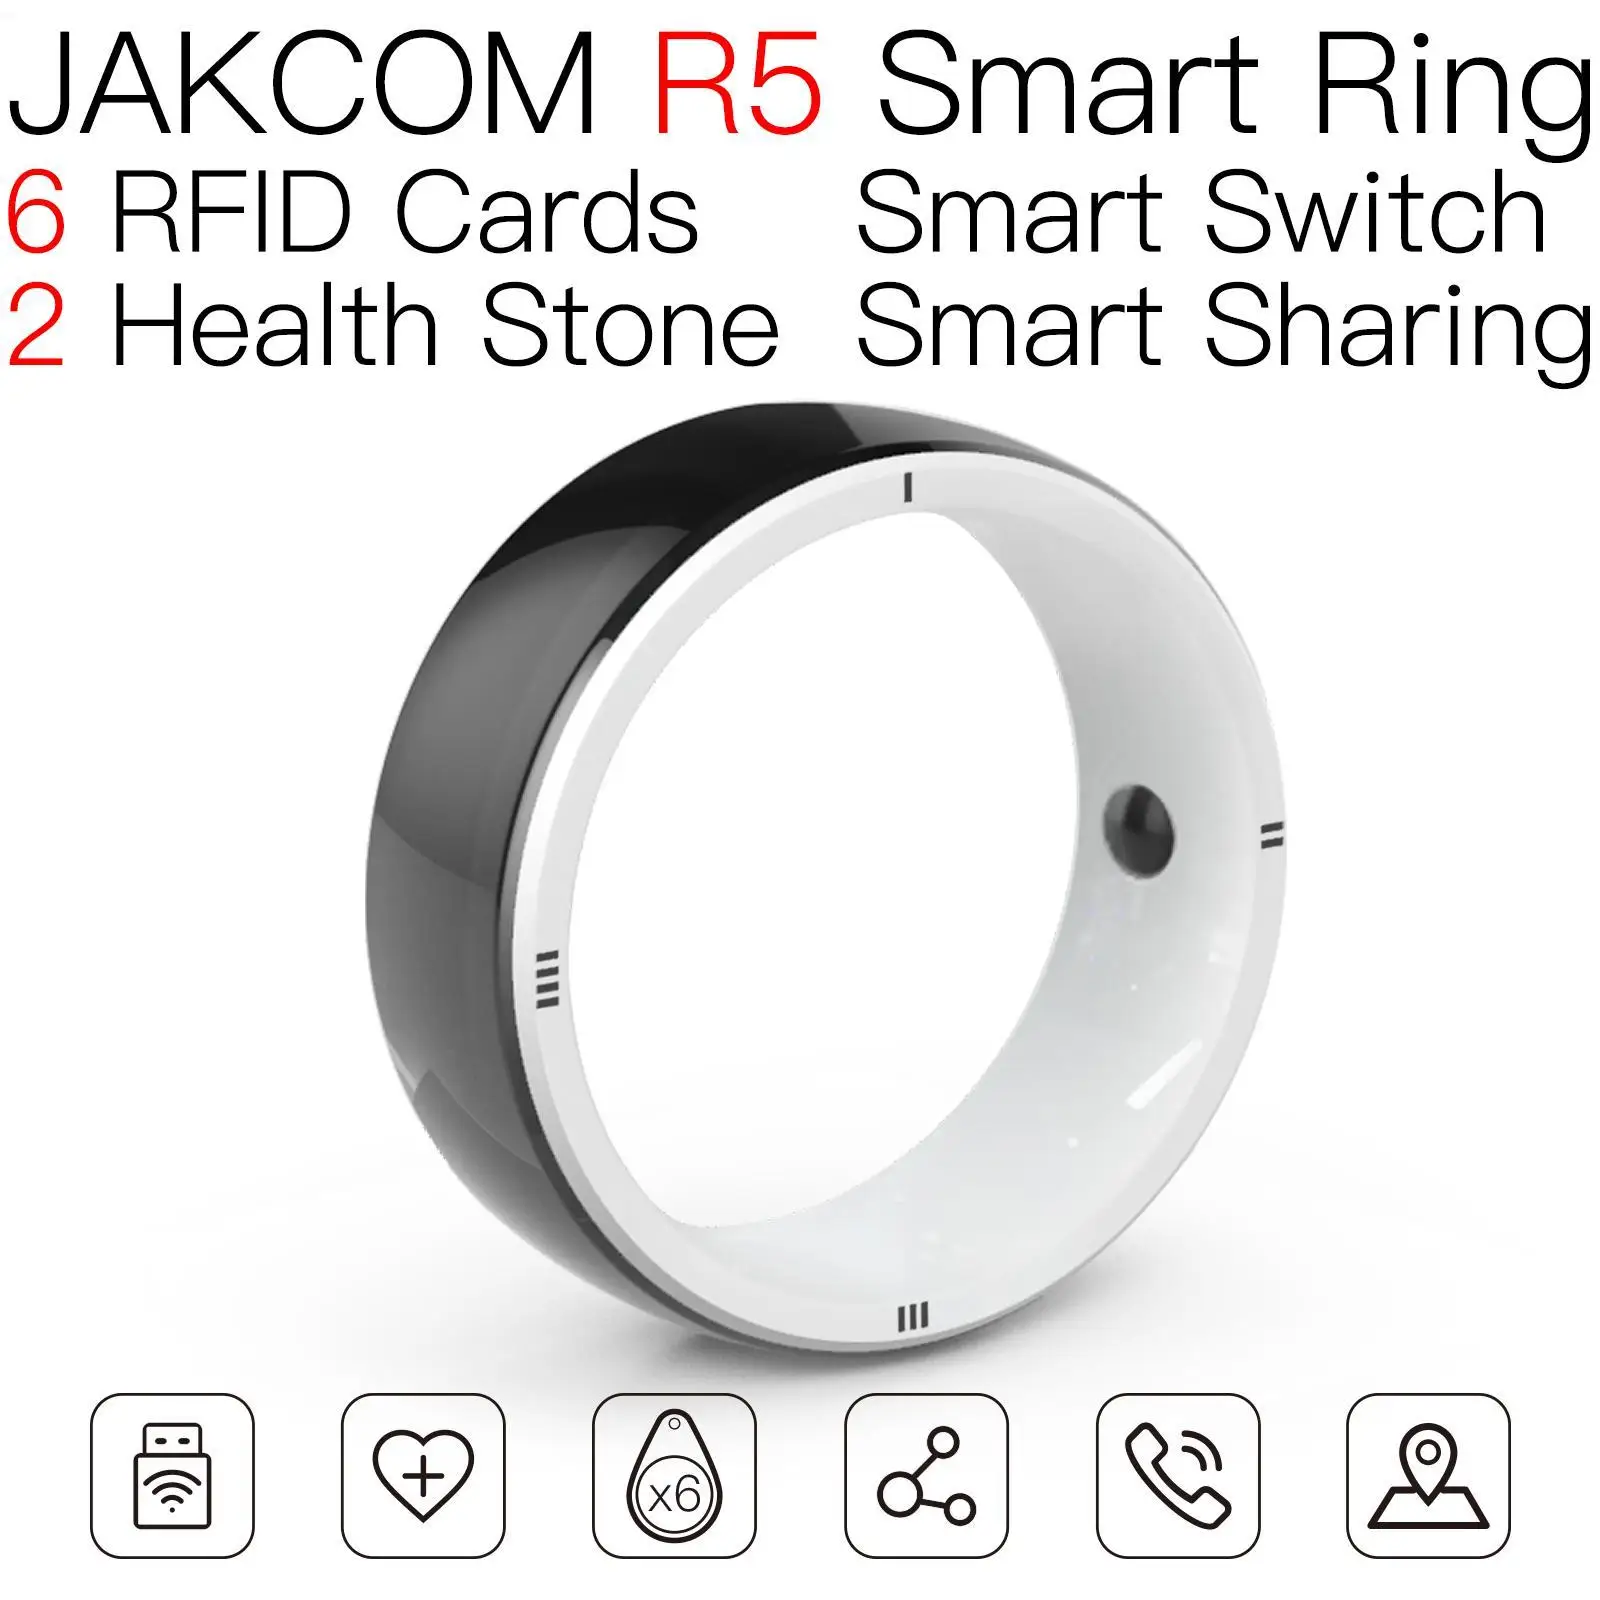 

JAKCOM R5 Smart Ring Best gift with 1k rfid label implant nfc skimming casino chips tag 125khz metal sticker ic chip